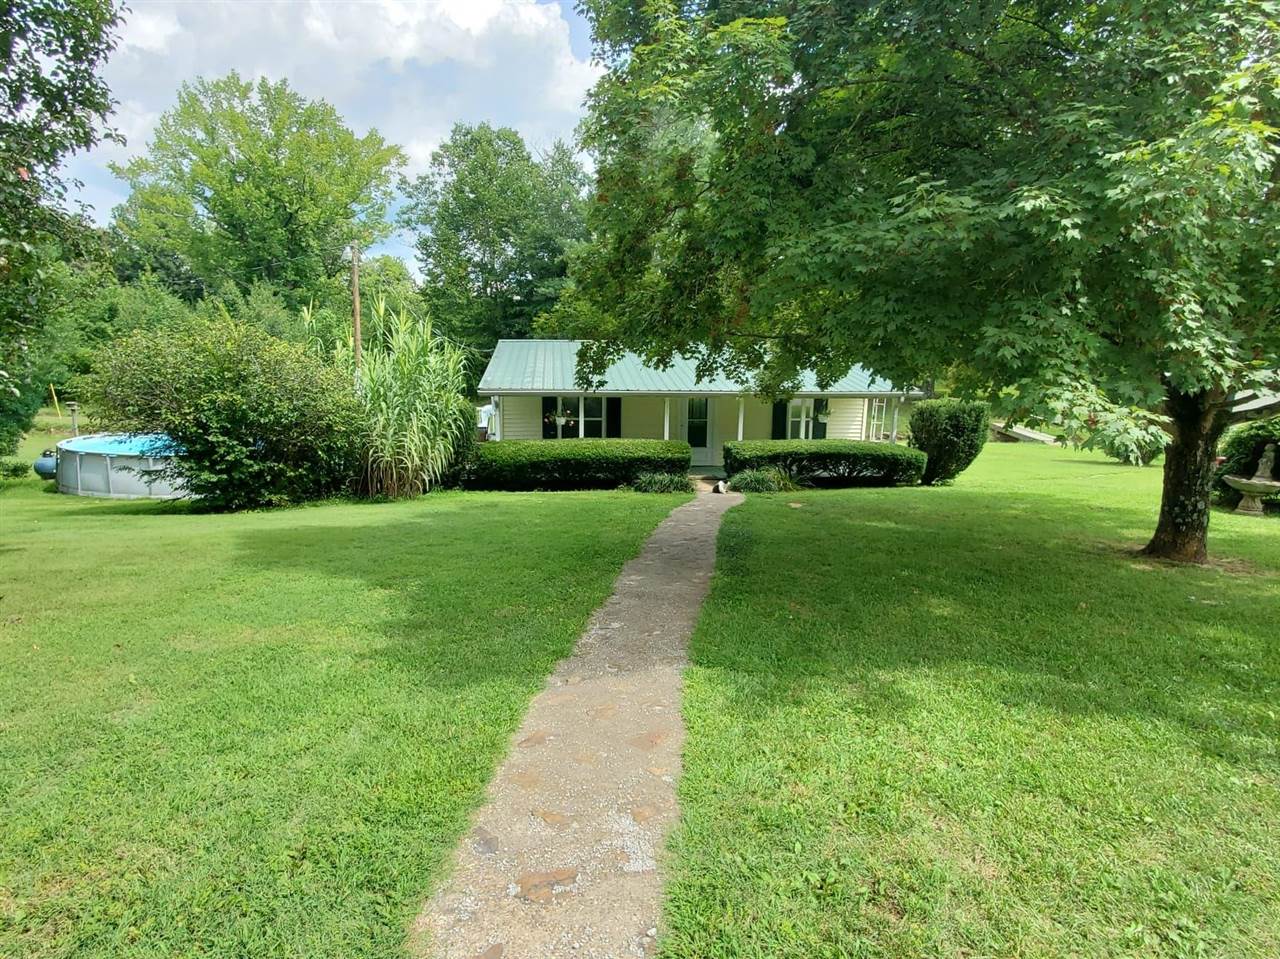 Great starter home or investment property! 2 Bedroom, 2 bathroom home resting on 1+/- acres with creek running through the property. Detached garage, outbuilding & pool included as well.